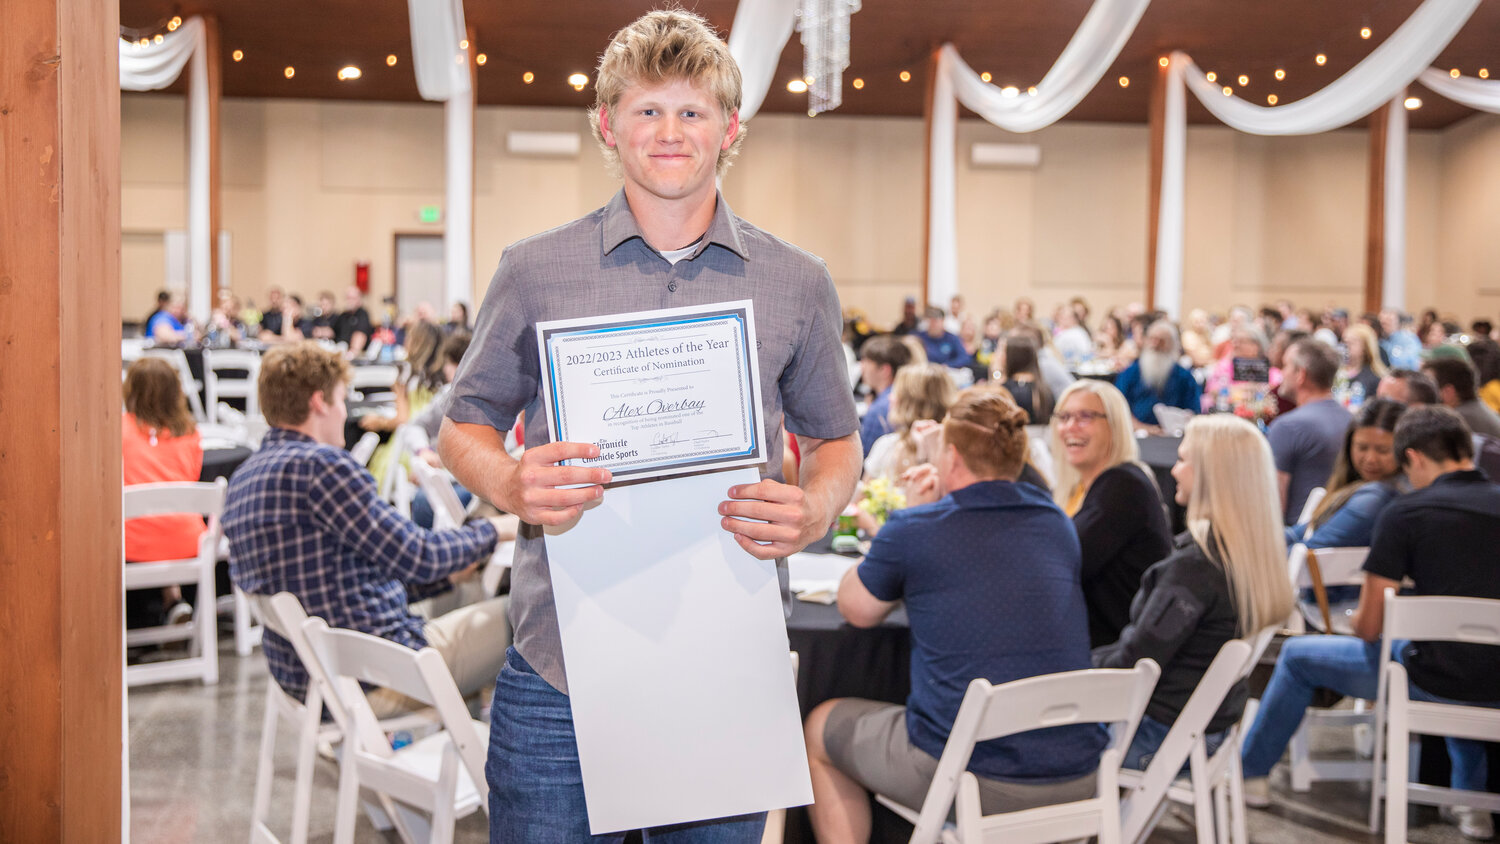 Alex Overbay smiles for a photo Tuesday evening during the “Athletes of the Year” banquet at the Jester Auto Museum. Overbay guided the T-Birds on the bump and at the plate to a regular season league title with an area high home runs and a near area high ERA on the hilt.